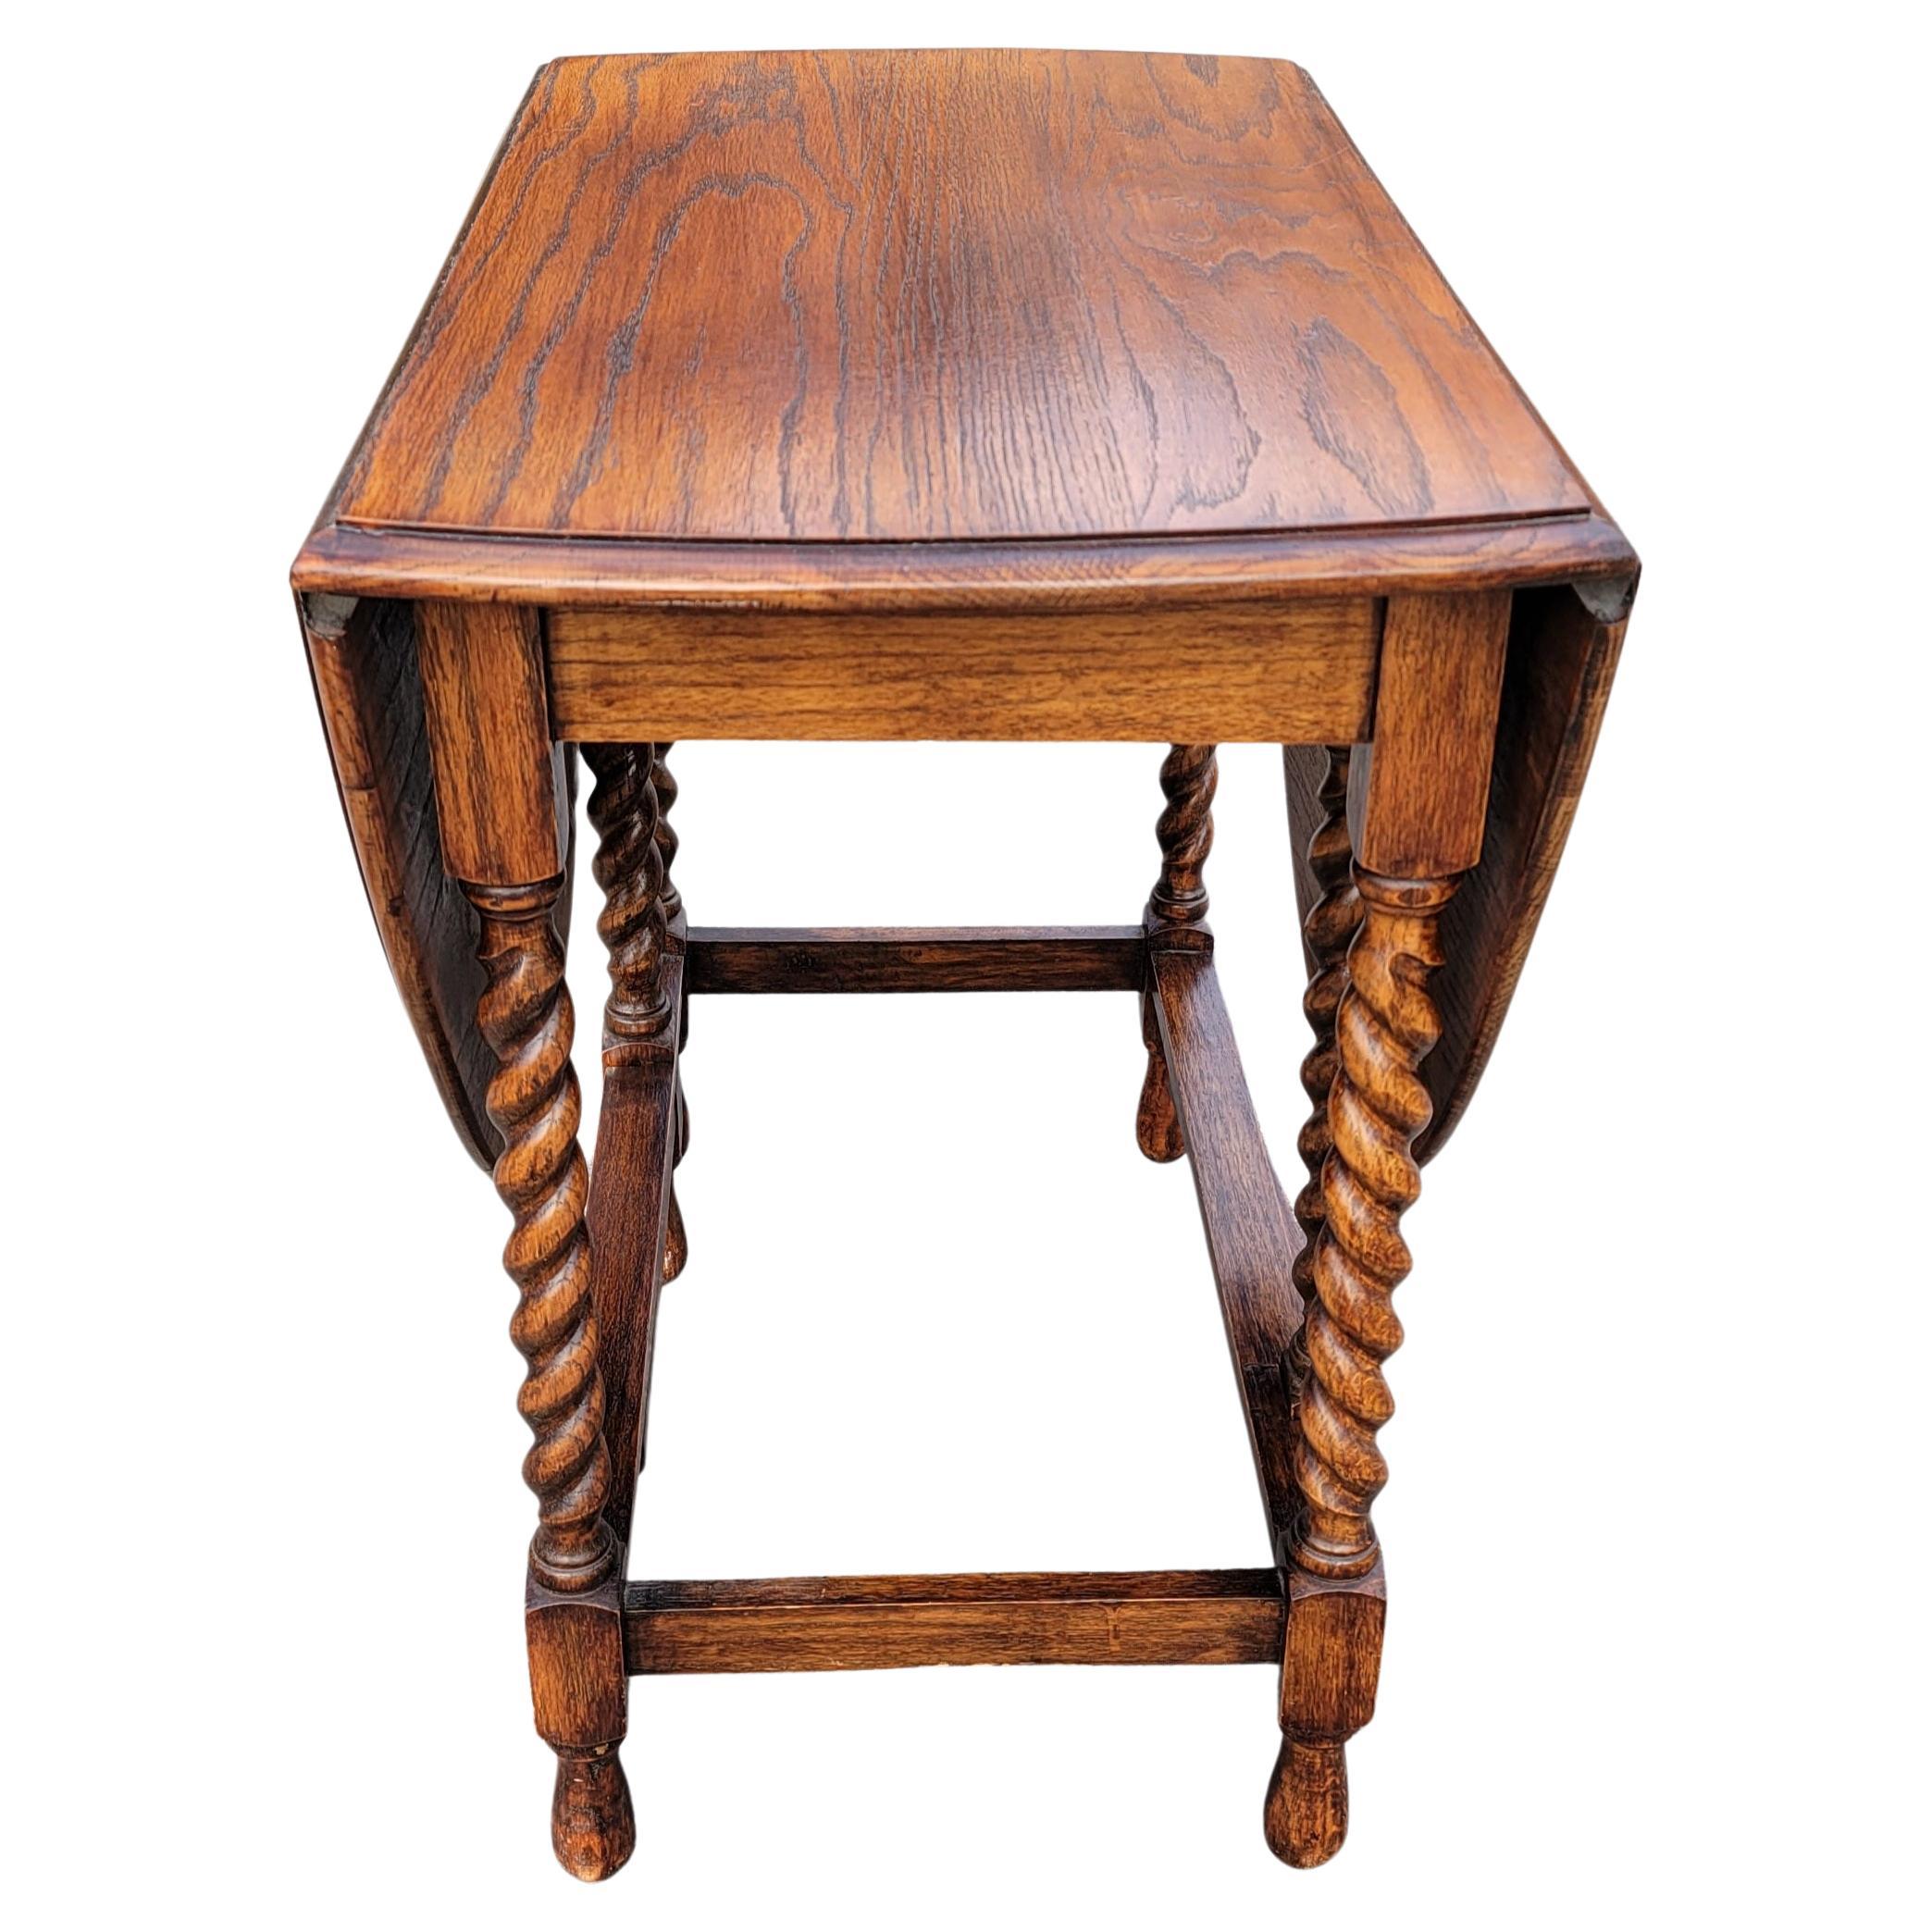 Hand-Crafted William and Mary Style Barley Twist Oak Gateleg Drop Leaf Breakfast Table For Sale